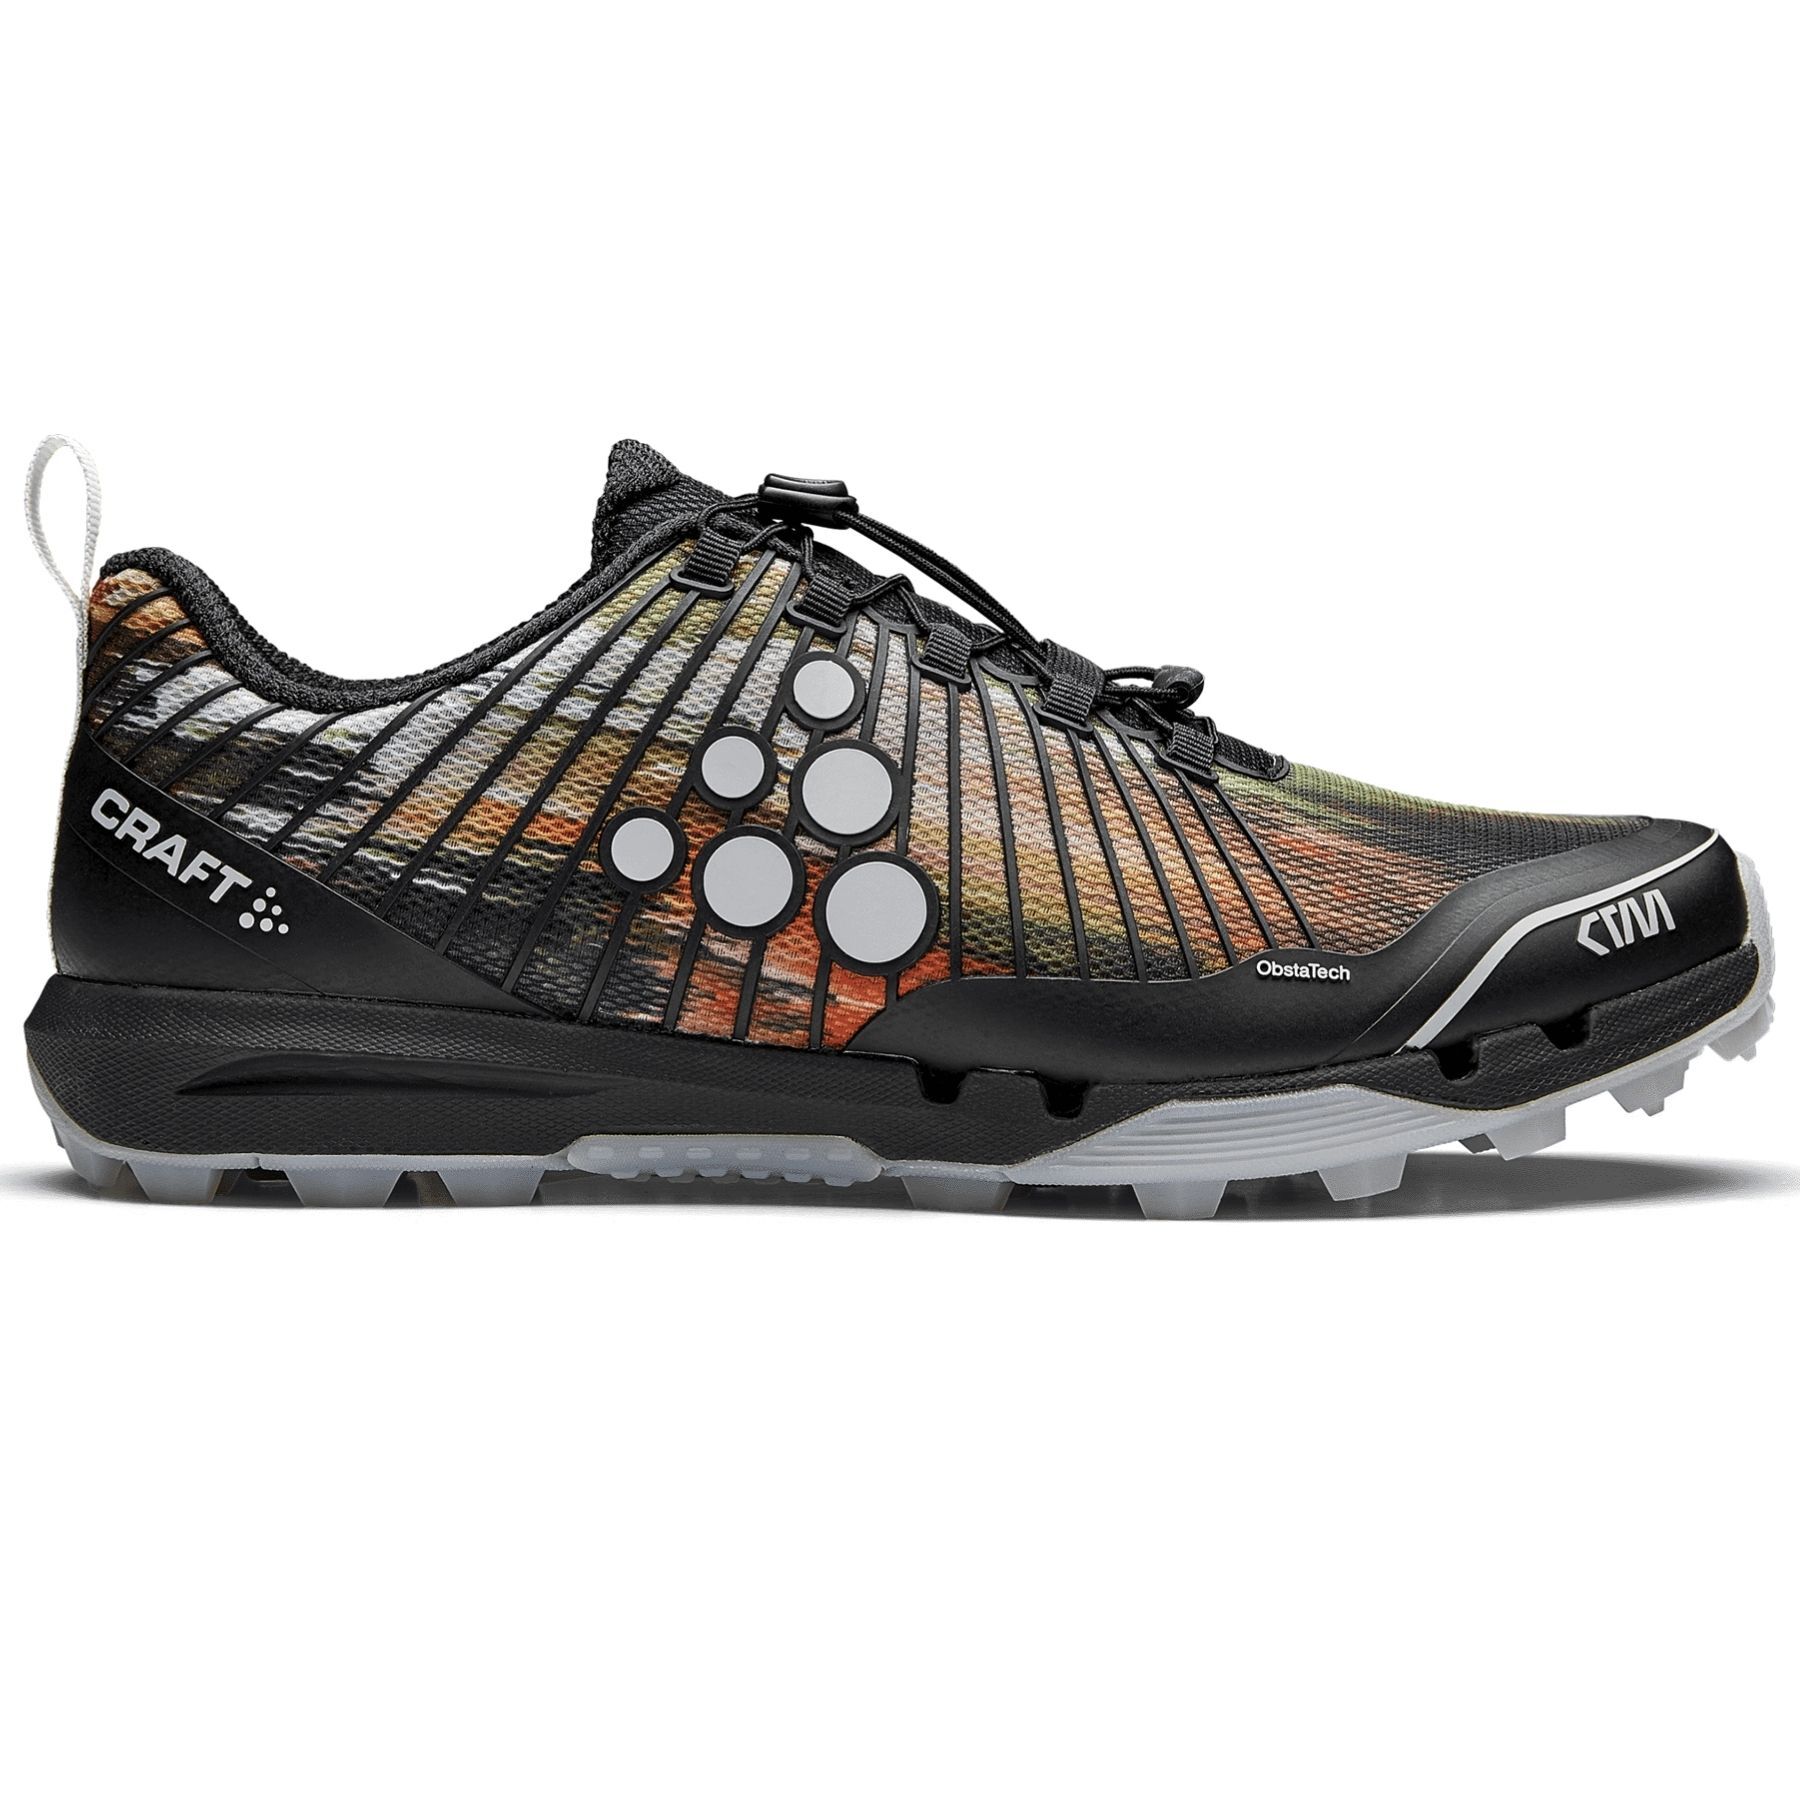 Craft OCRxCTM - Trail running shoes - Men's